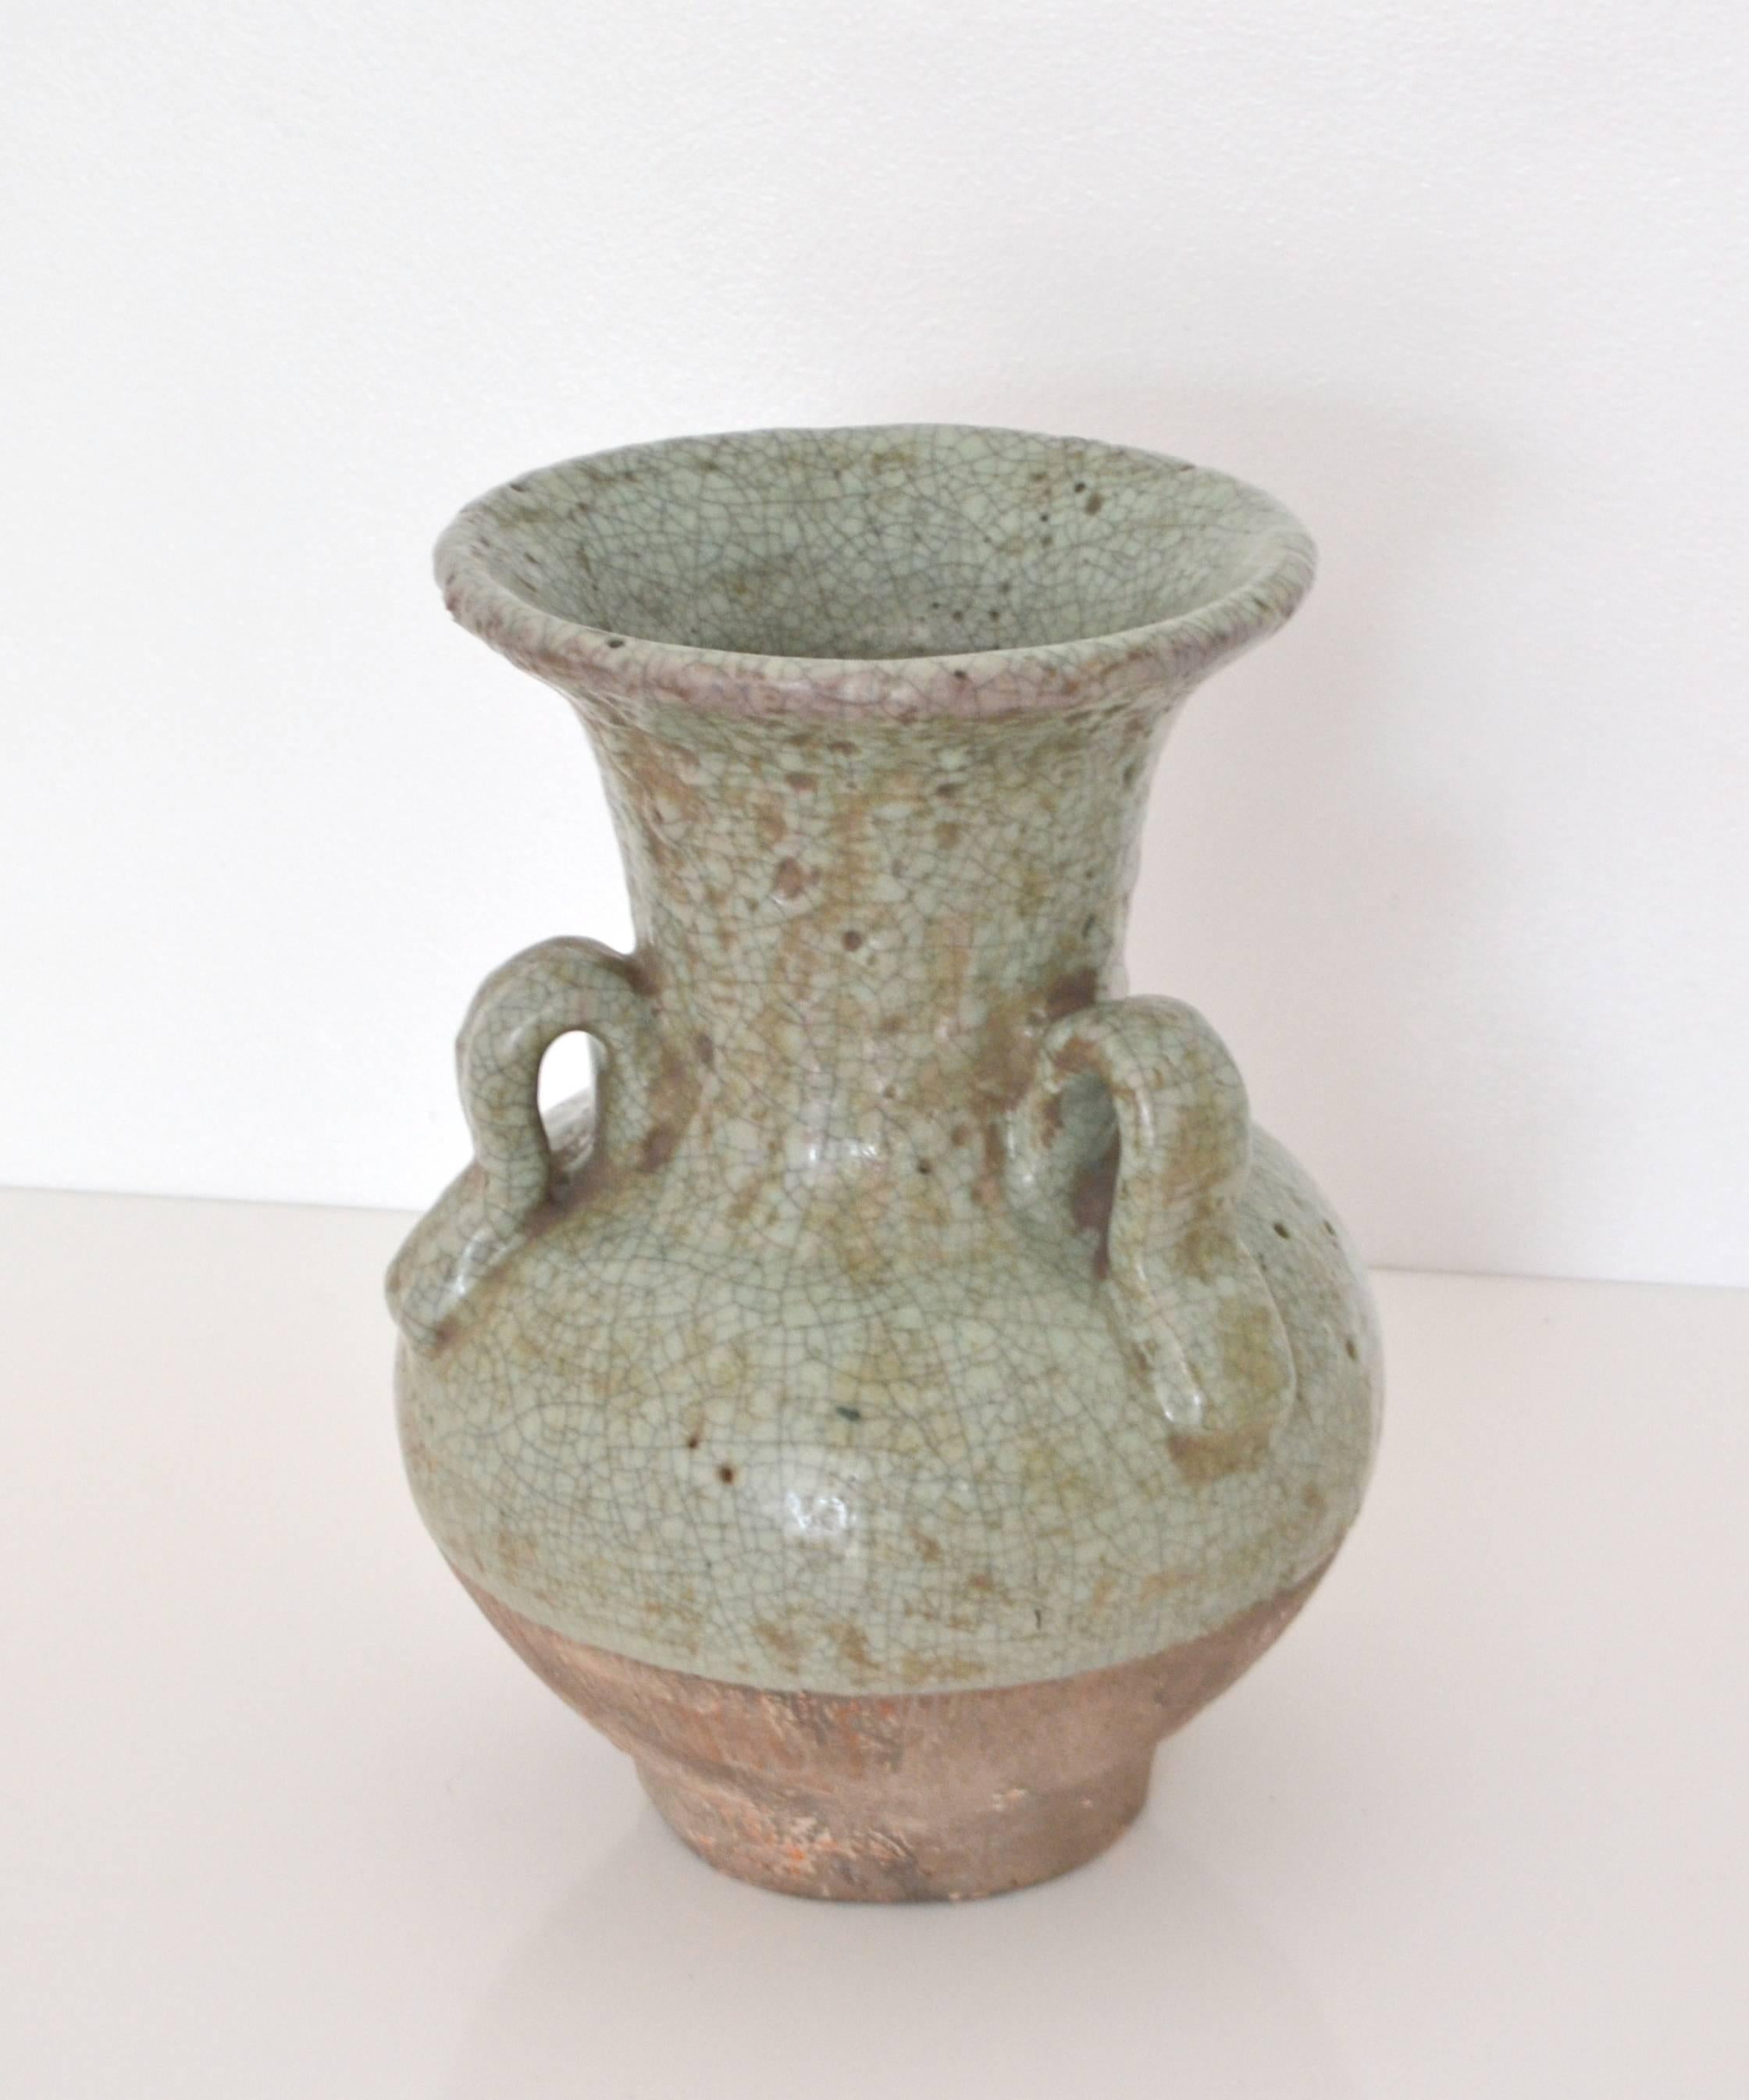 Asian Celadon Crackle Glazed Ceramic Vase In Good Condition For Sale In West Palm Beach, FL